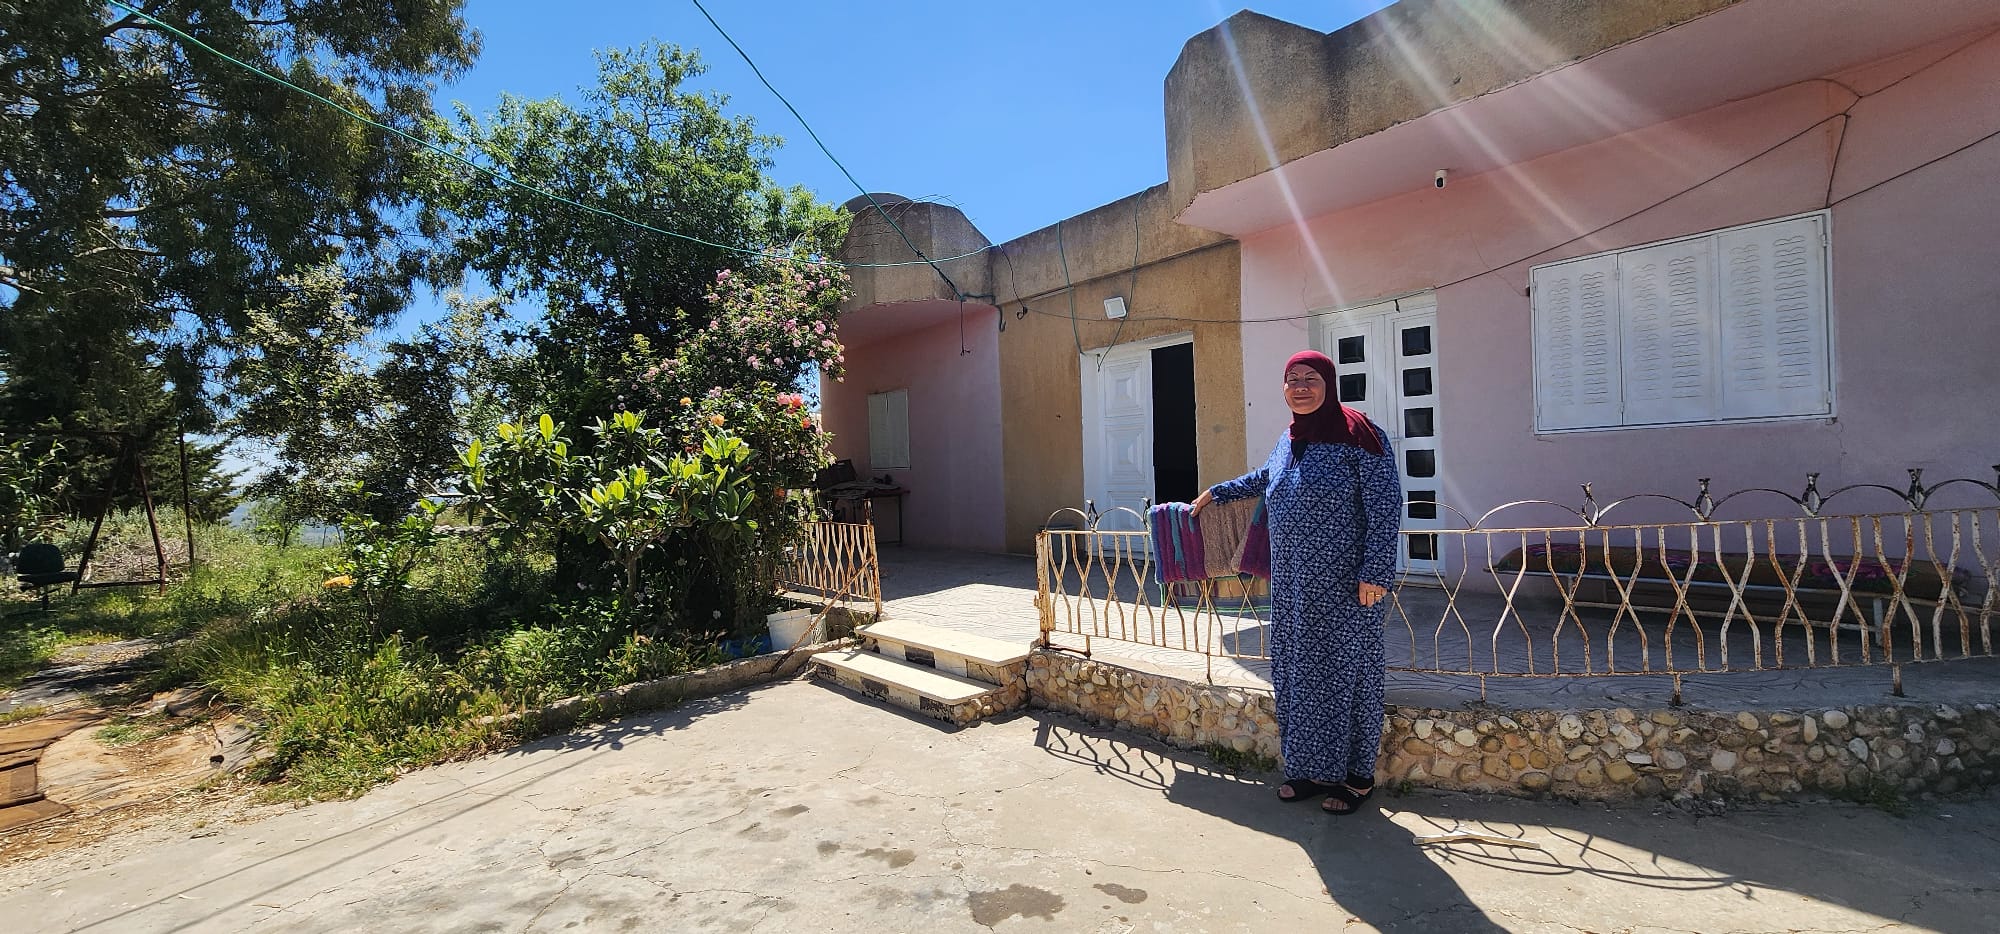 Umm Saleh Shreteh standing in front of her house in Al Mazra’a Al Qibliya, the central West Bank. Photo by OCHA